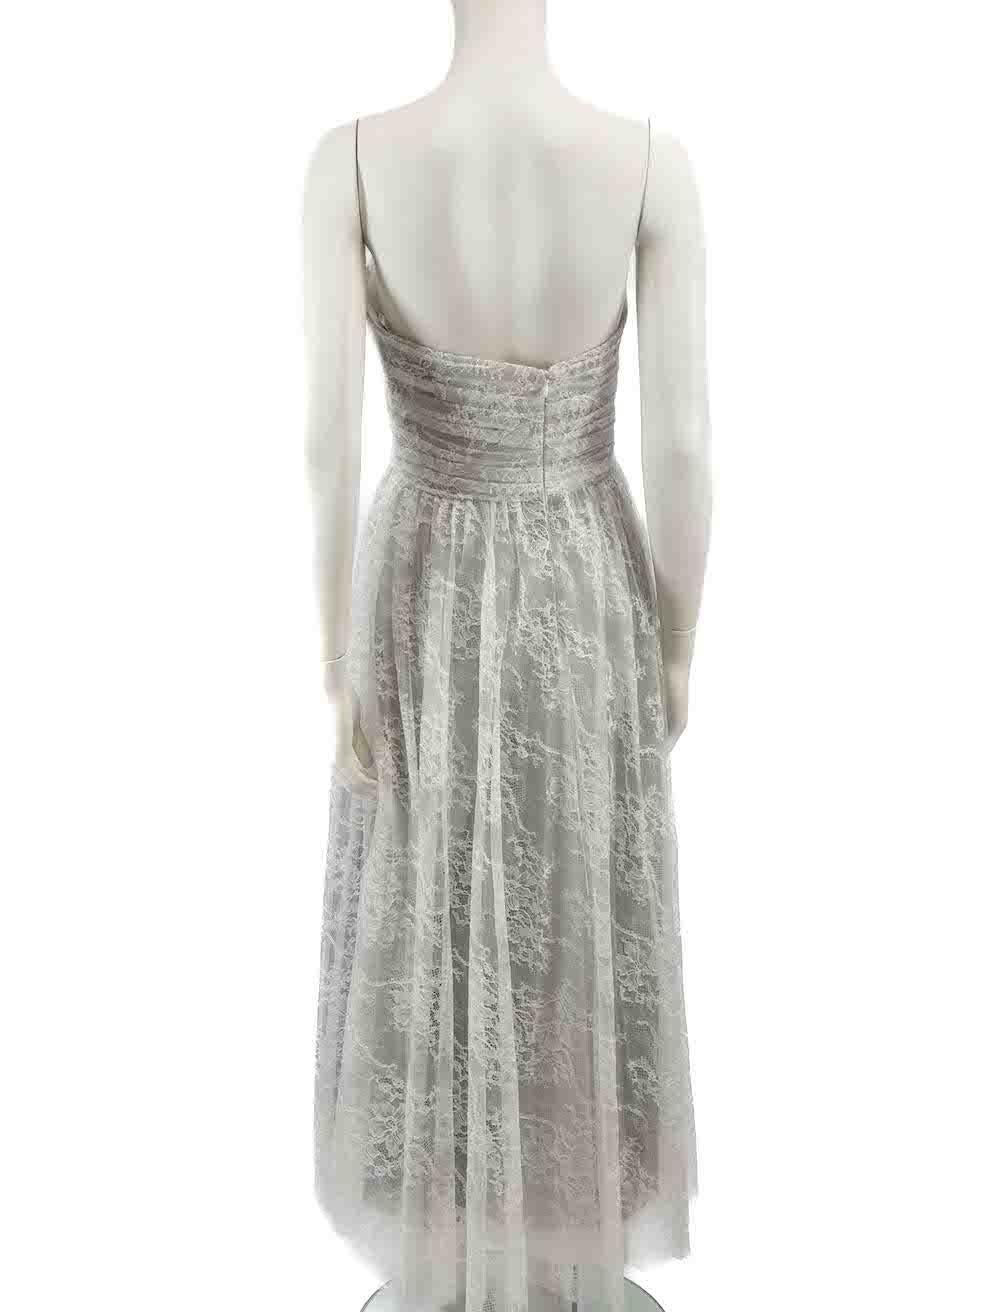 Honayda White Floral Lace Maxi Dress Size XL In Good Condition For Sale In London, GB